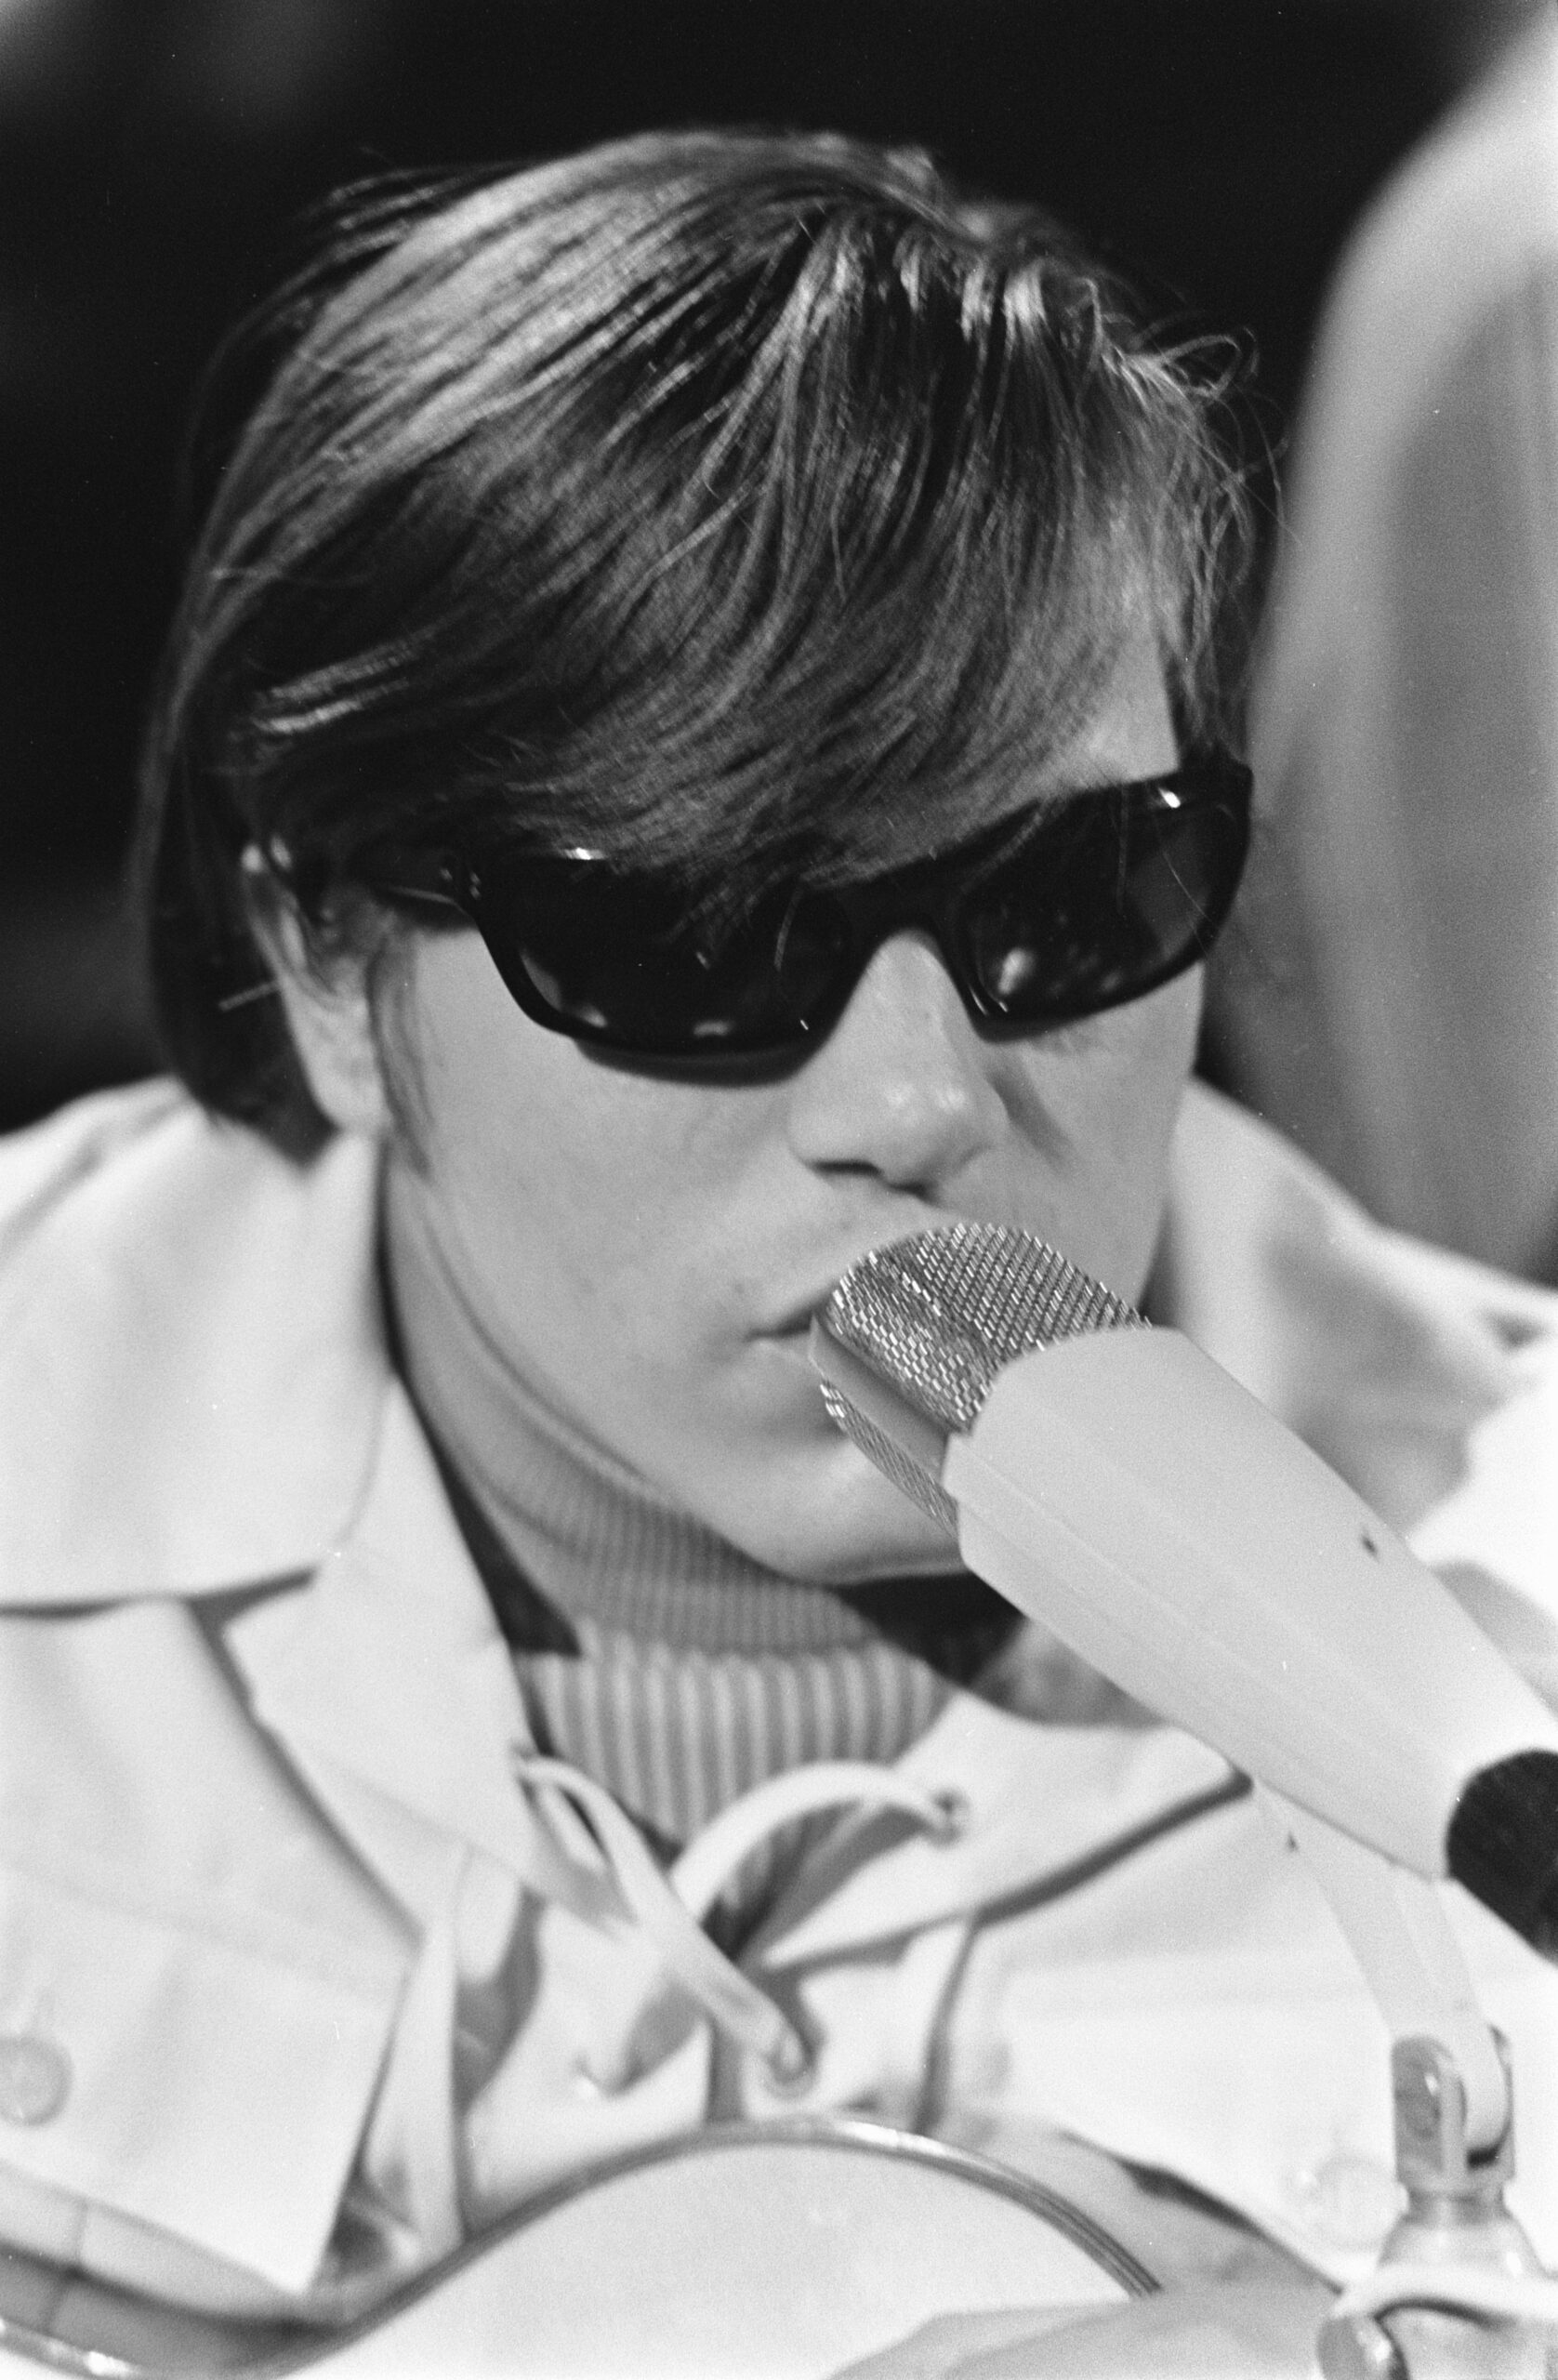 Introduction to Jose Feliciano